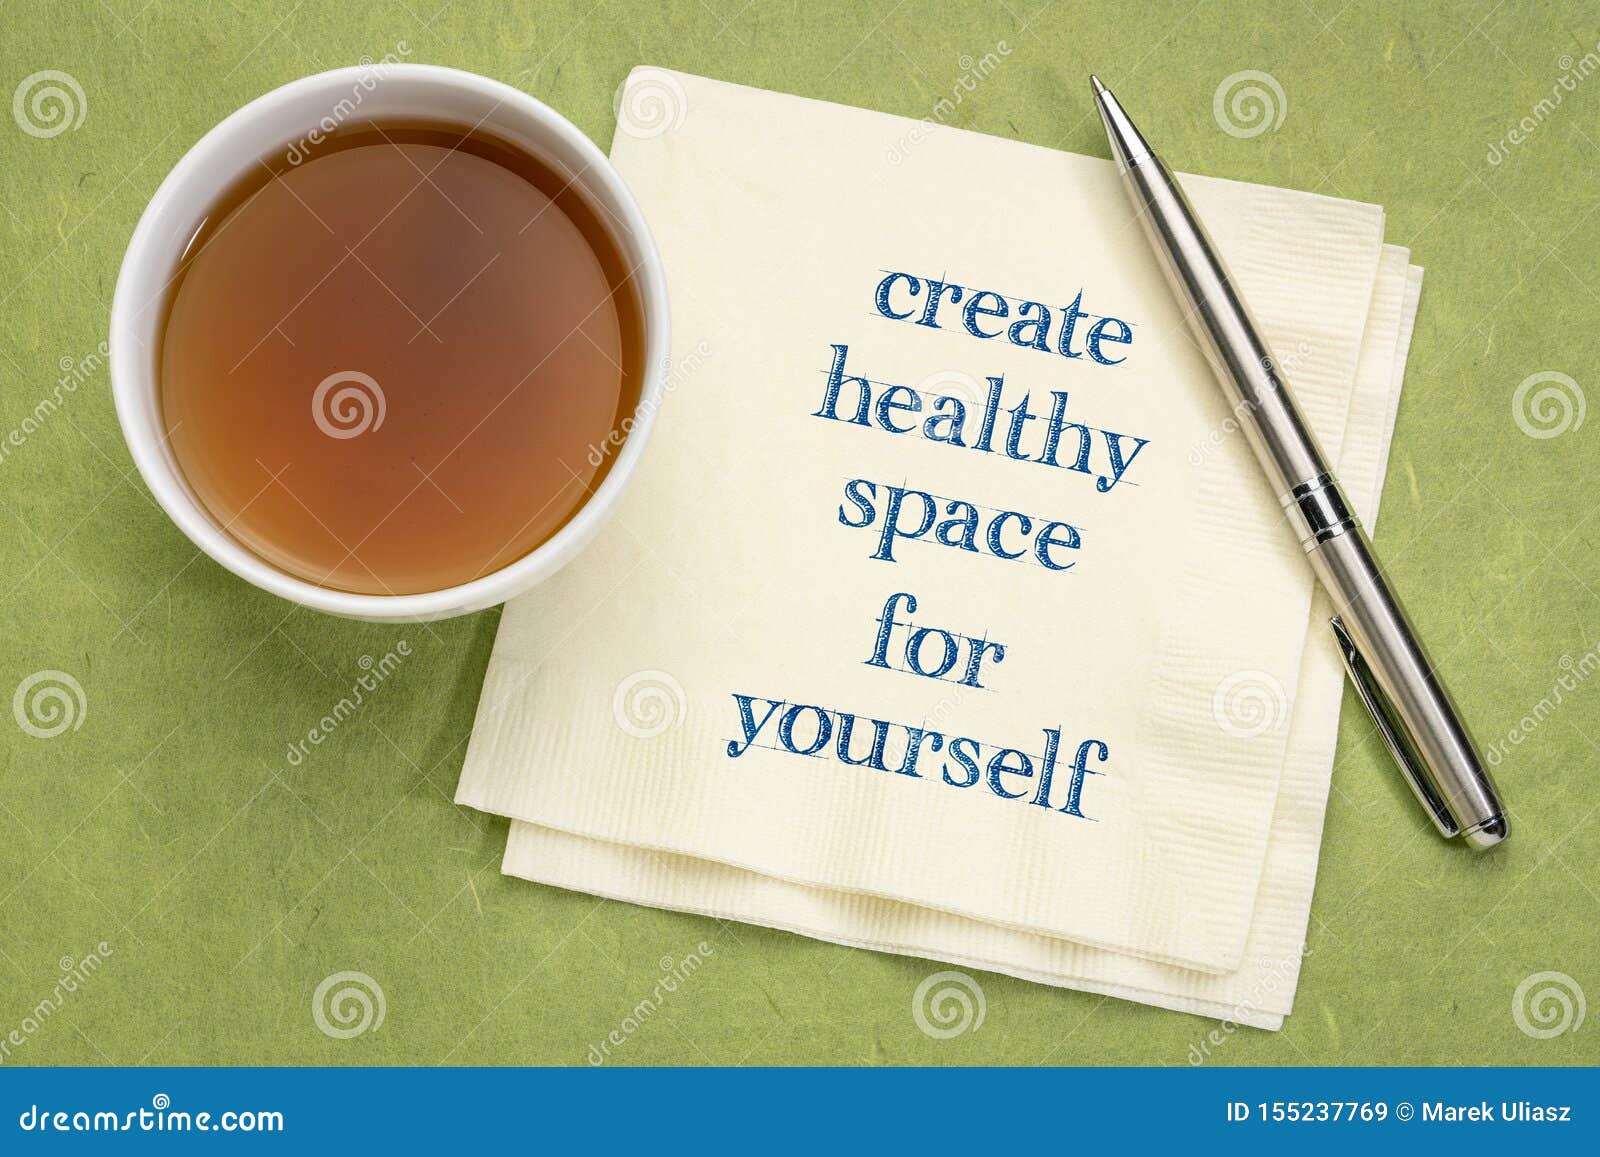 Create Healthy Space For Yourself Stock Image Image Of Create